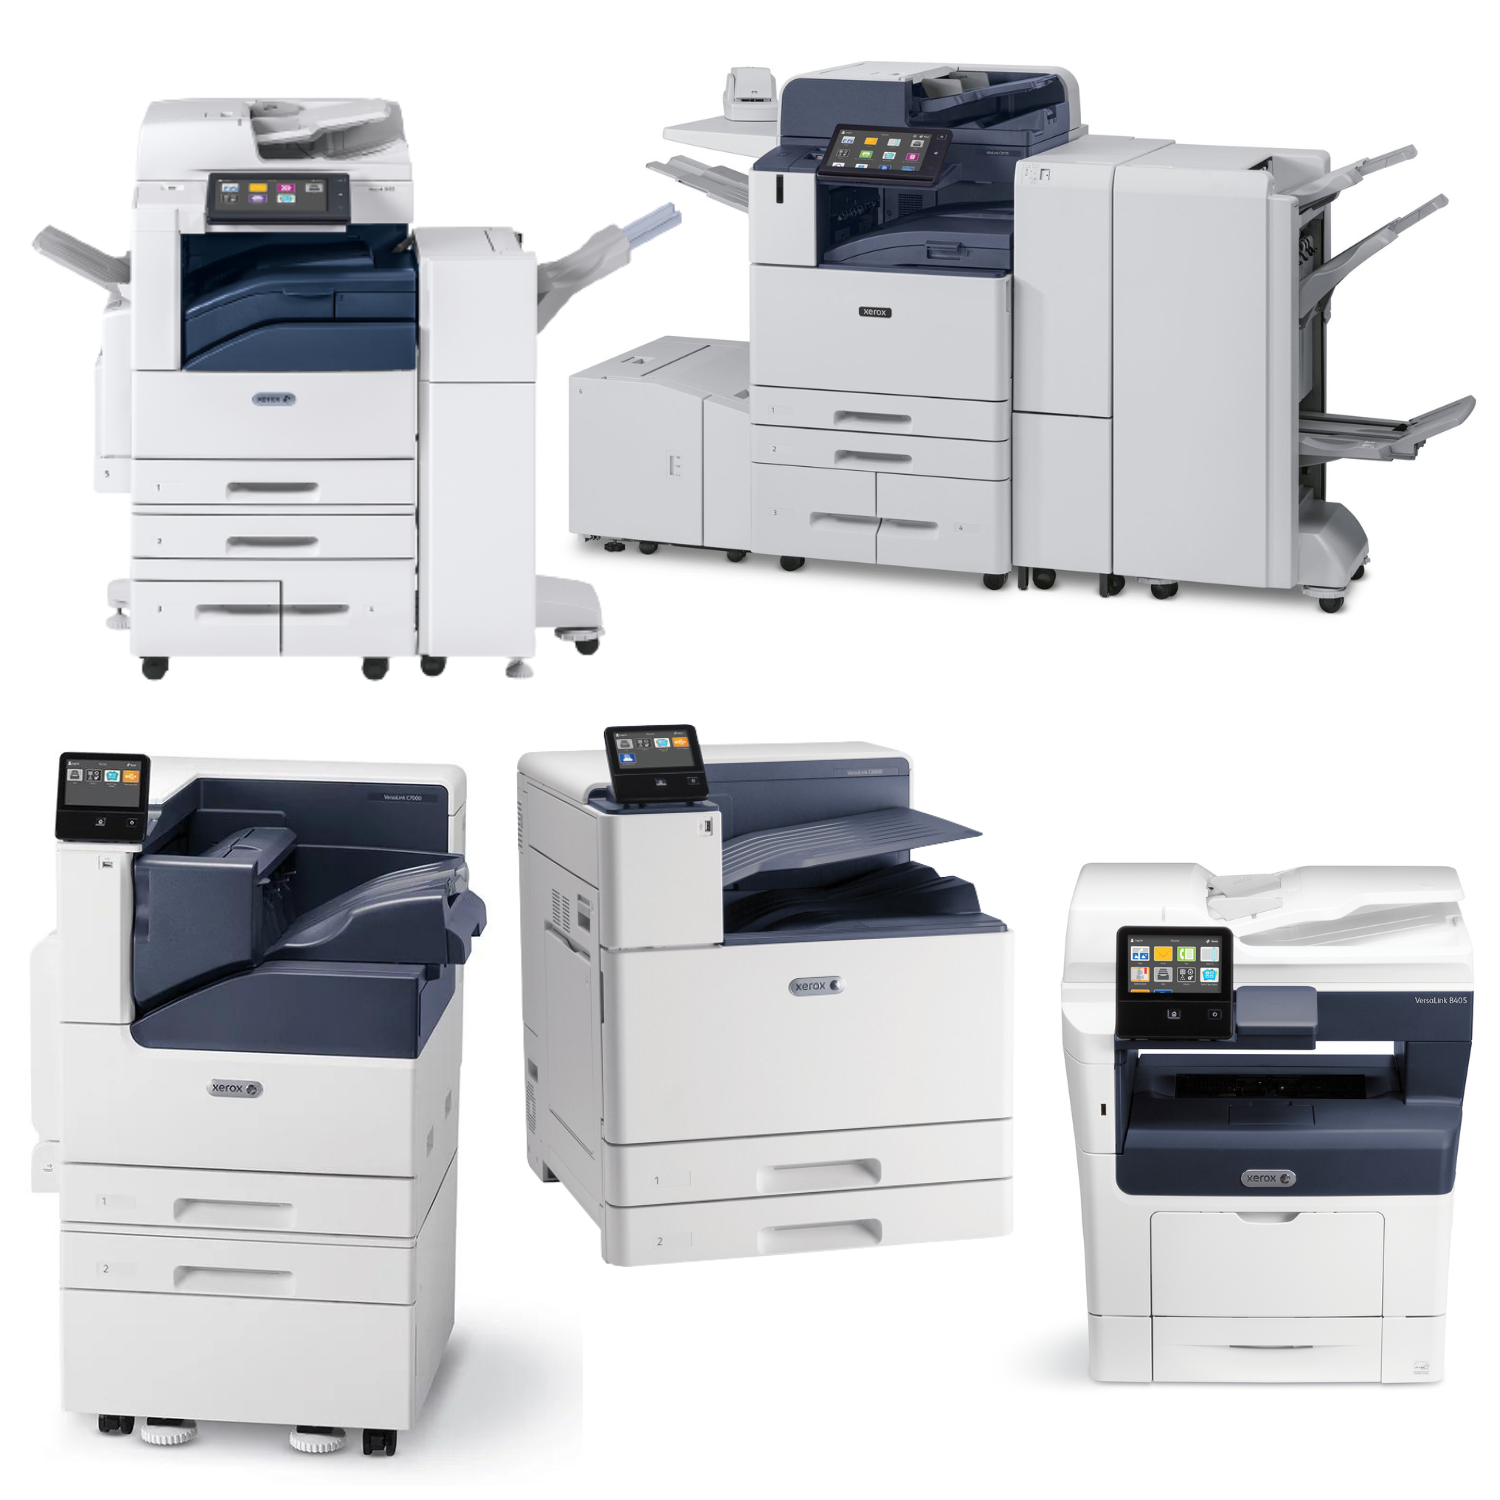 Maximize Your Real Estate Business with These 5 High-Performance Xerox Copiers